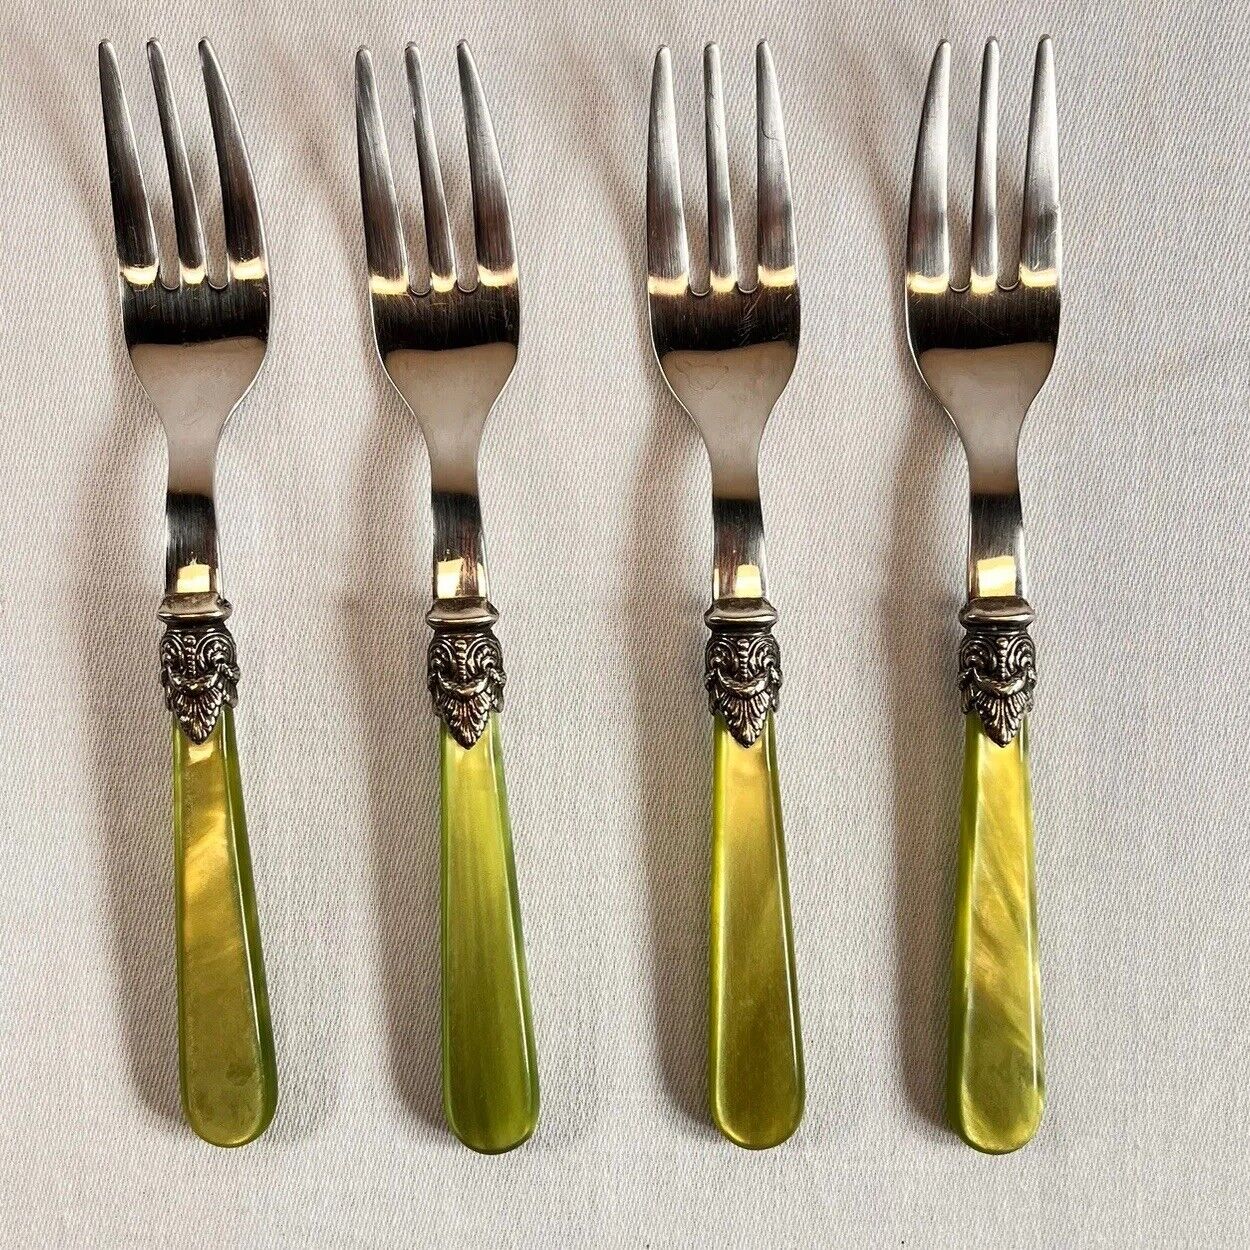 4 Eme Inox Cocktail Seafood Forks Italy 18/10 Napoleon Pearl Green Handle 6\